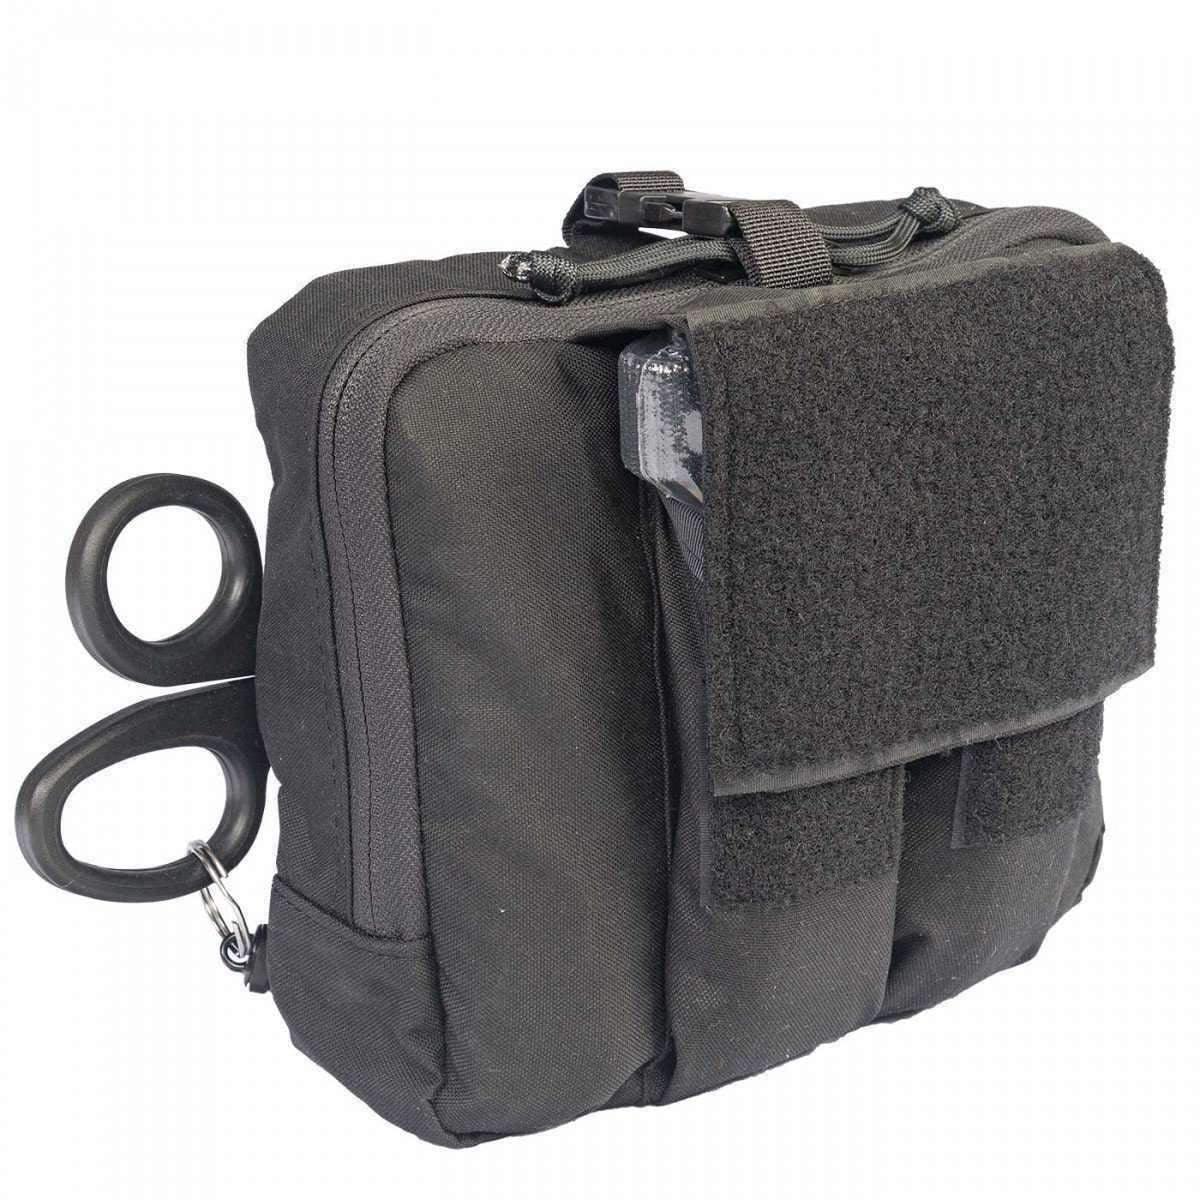 NAR-4 Tactical Medic Chest Pouch - Vendor